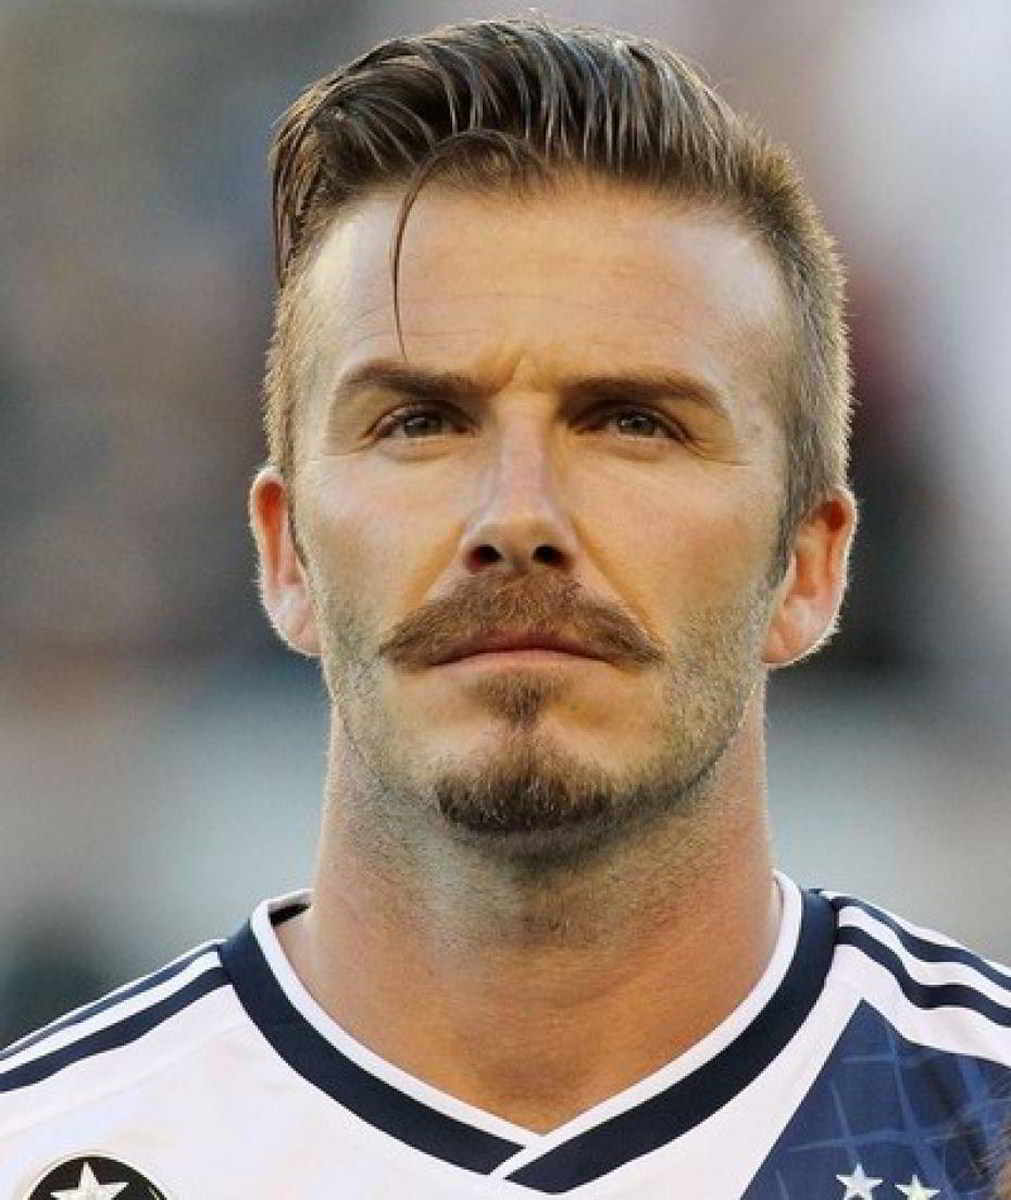 DAVID BECKHAM HAIRSTYLE pictures